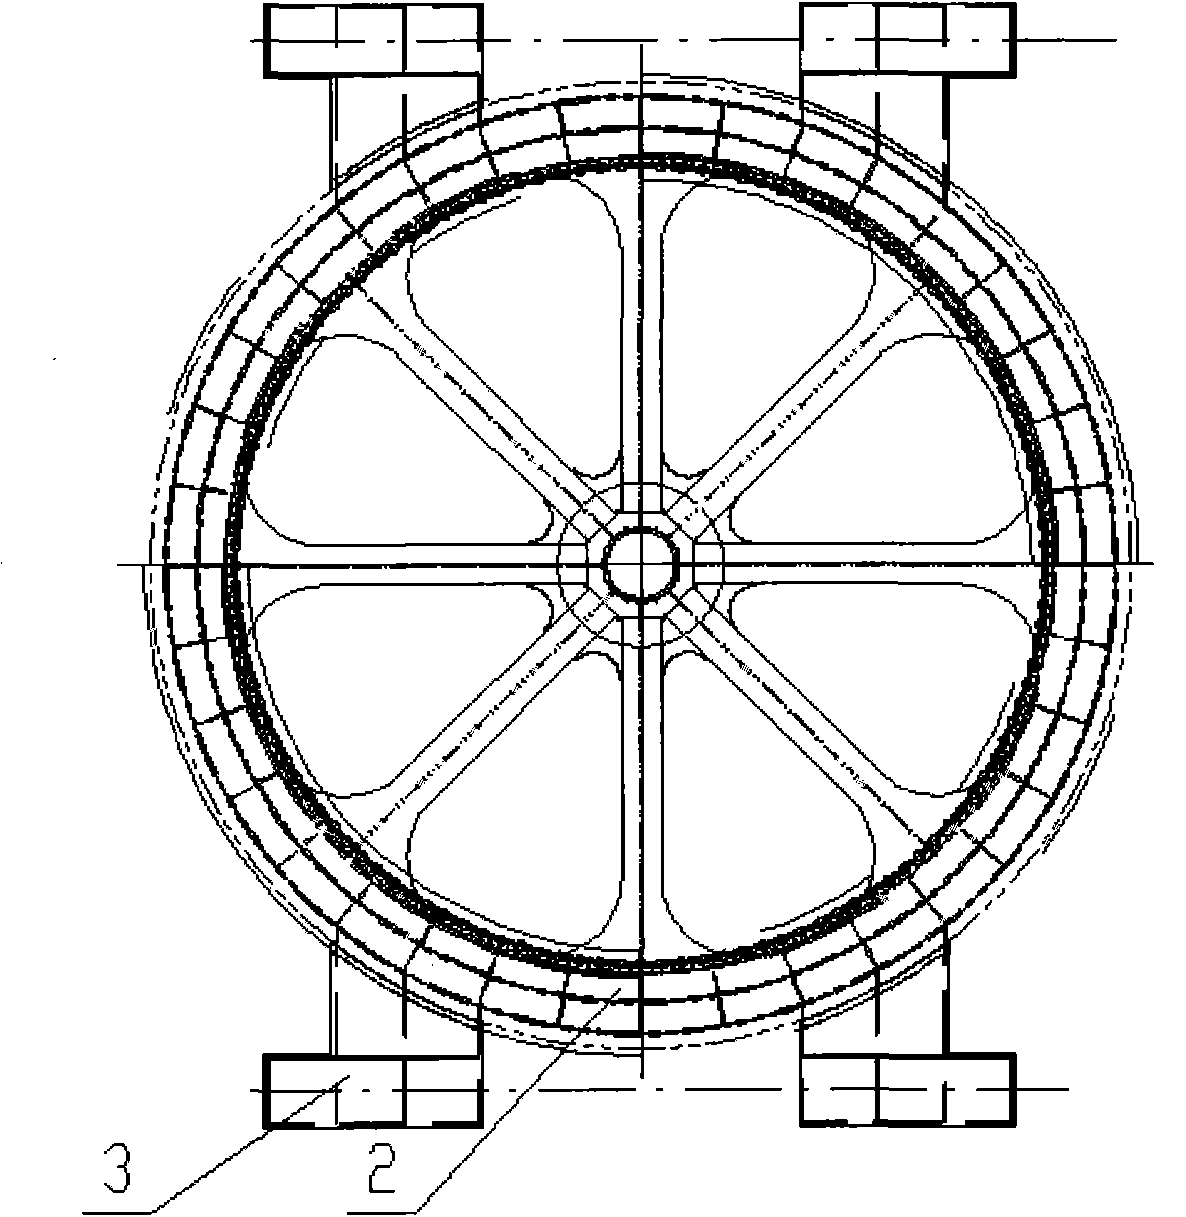 Roll-on device and method for large fixed type rotary crane